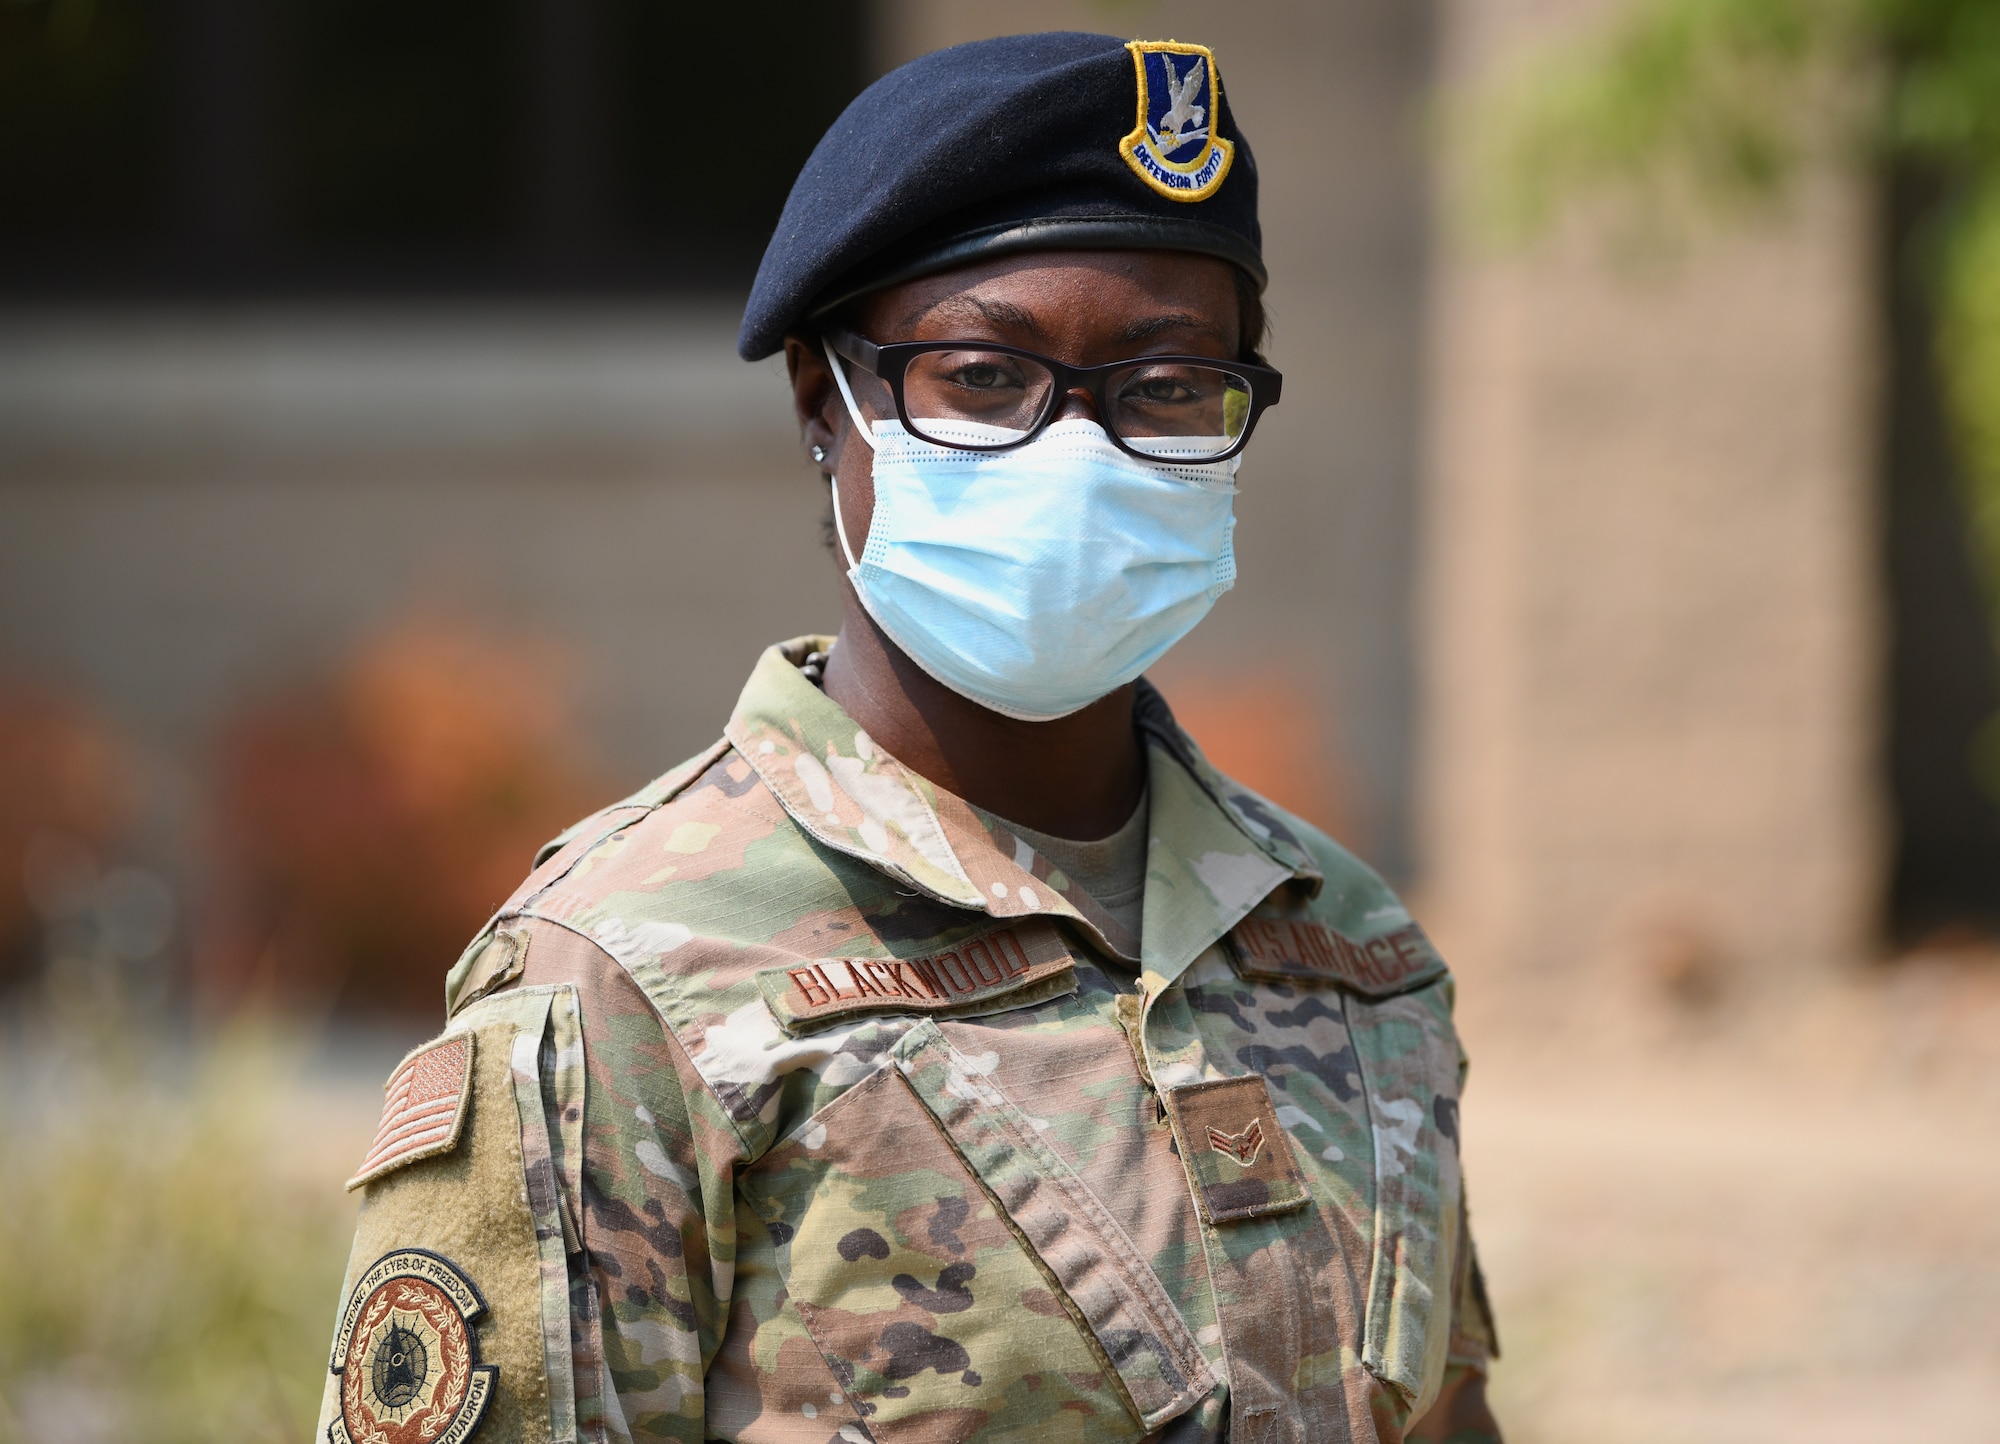 Airman 1st Class Nadine Blackwood, 9th Security Forces Squadron installation entry controller, poses for a photo Aug.27, 2021, at Beale Air Force Base, California.